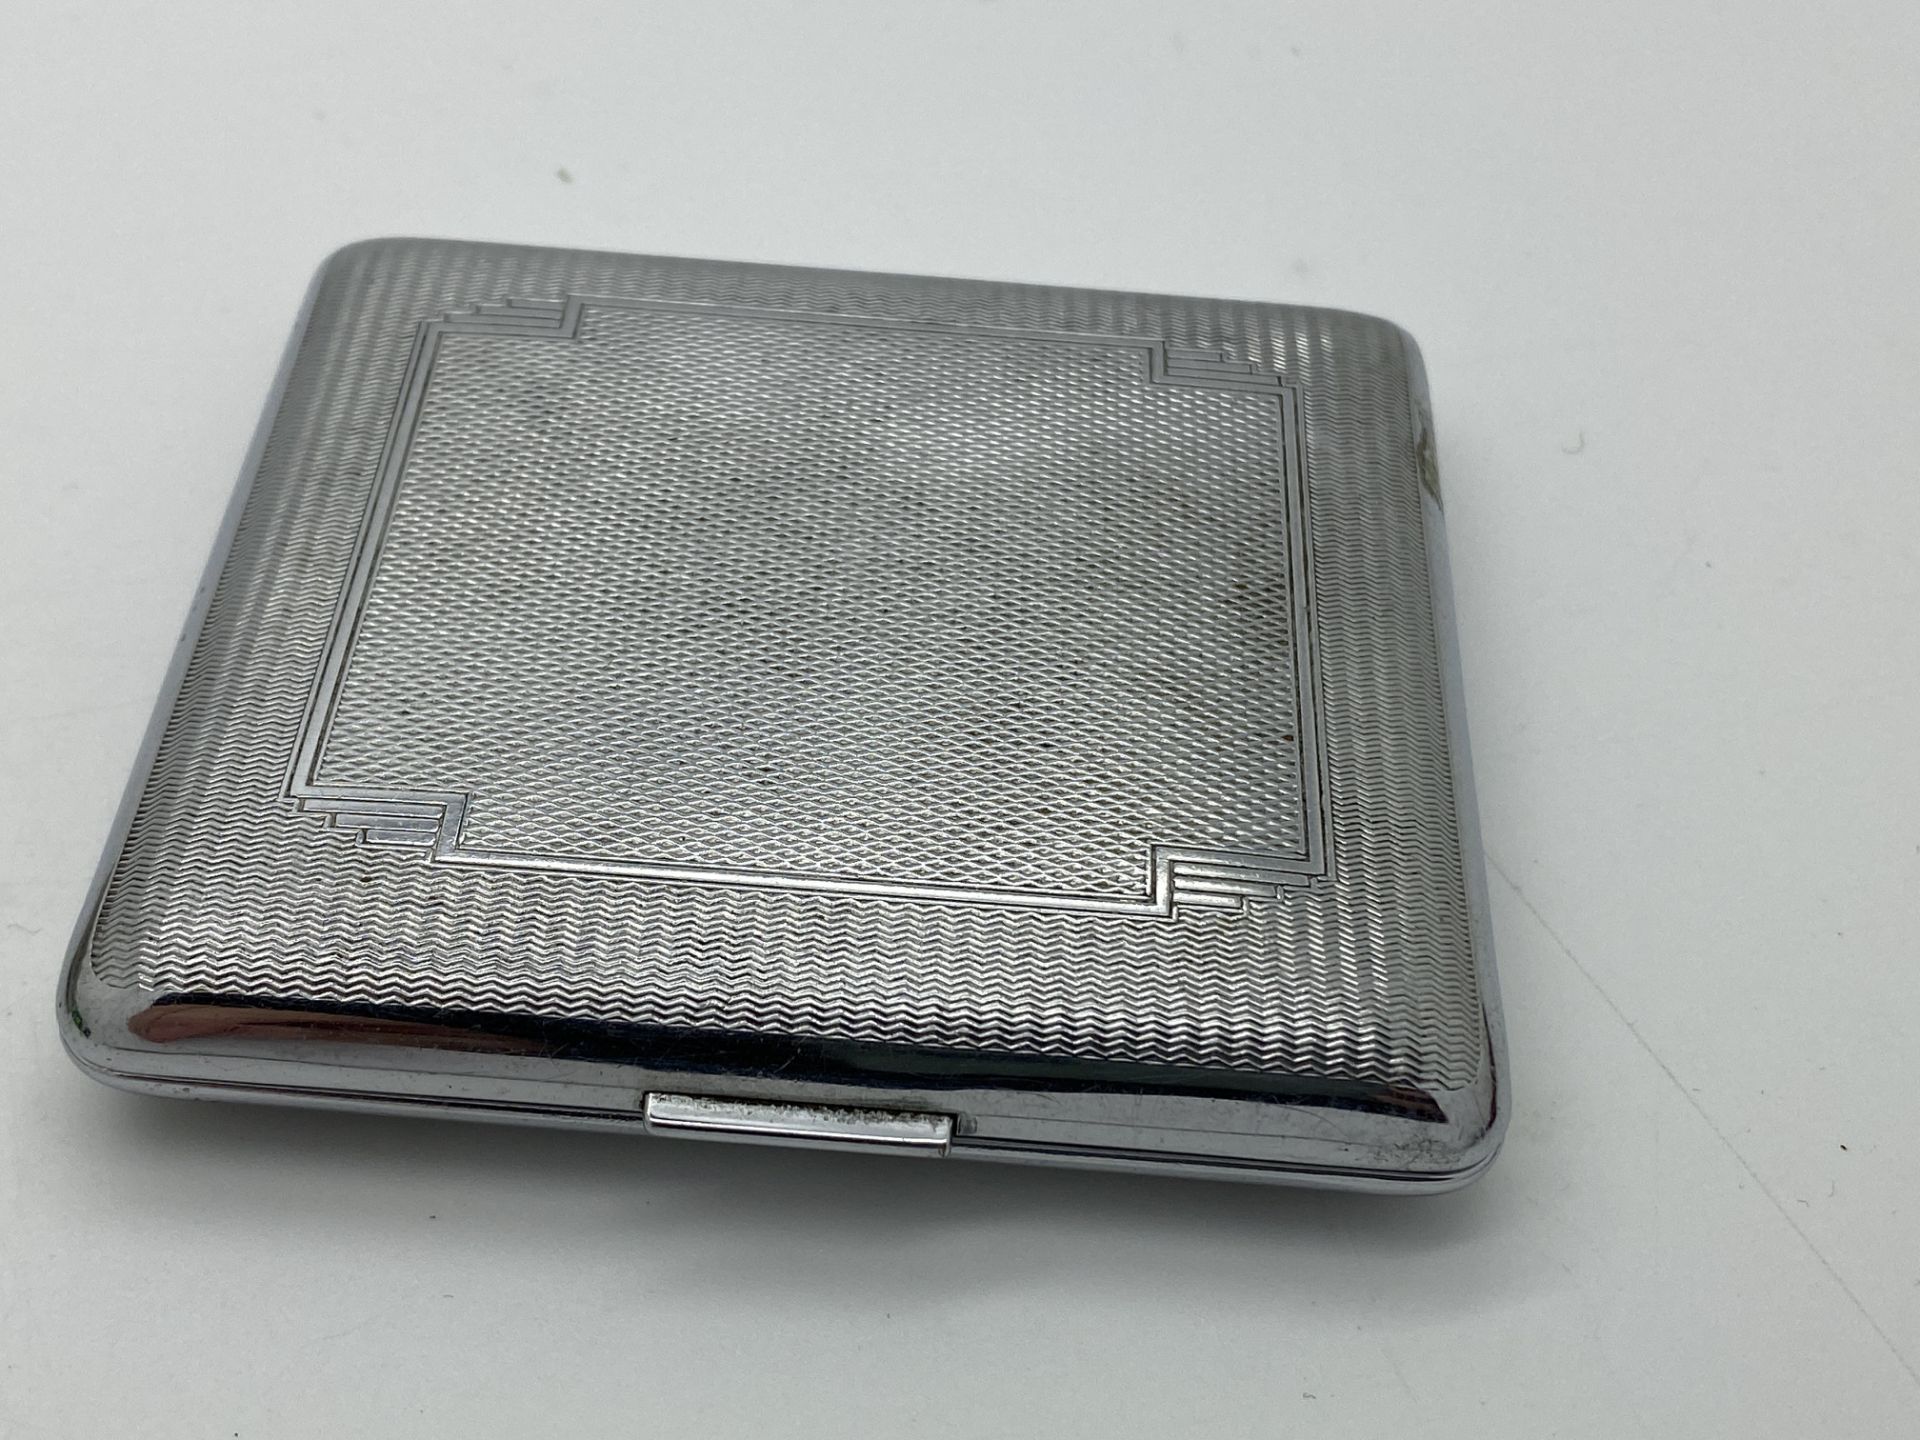 VINTAGE METAL CIGARETTE CASE 1 x OTHER METAL SNUFF BOX - Image 5 of 8